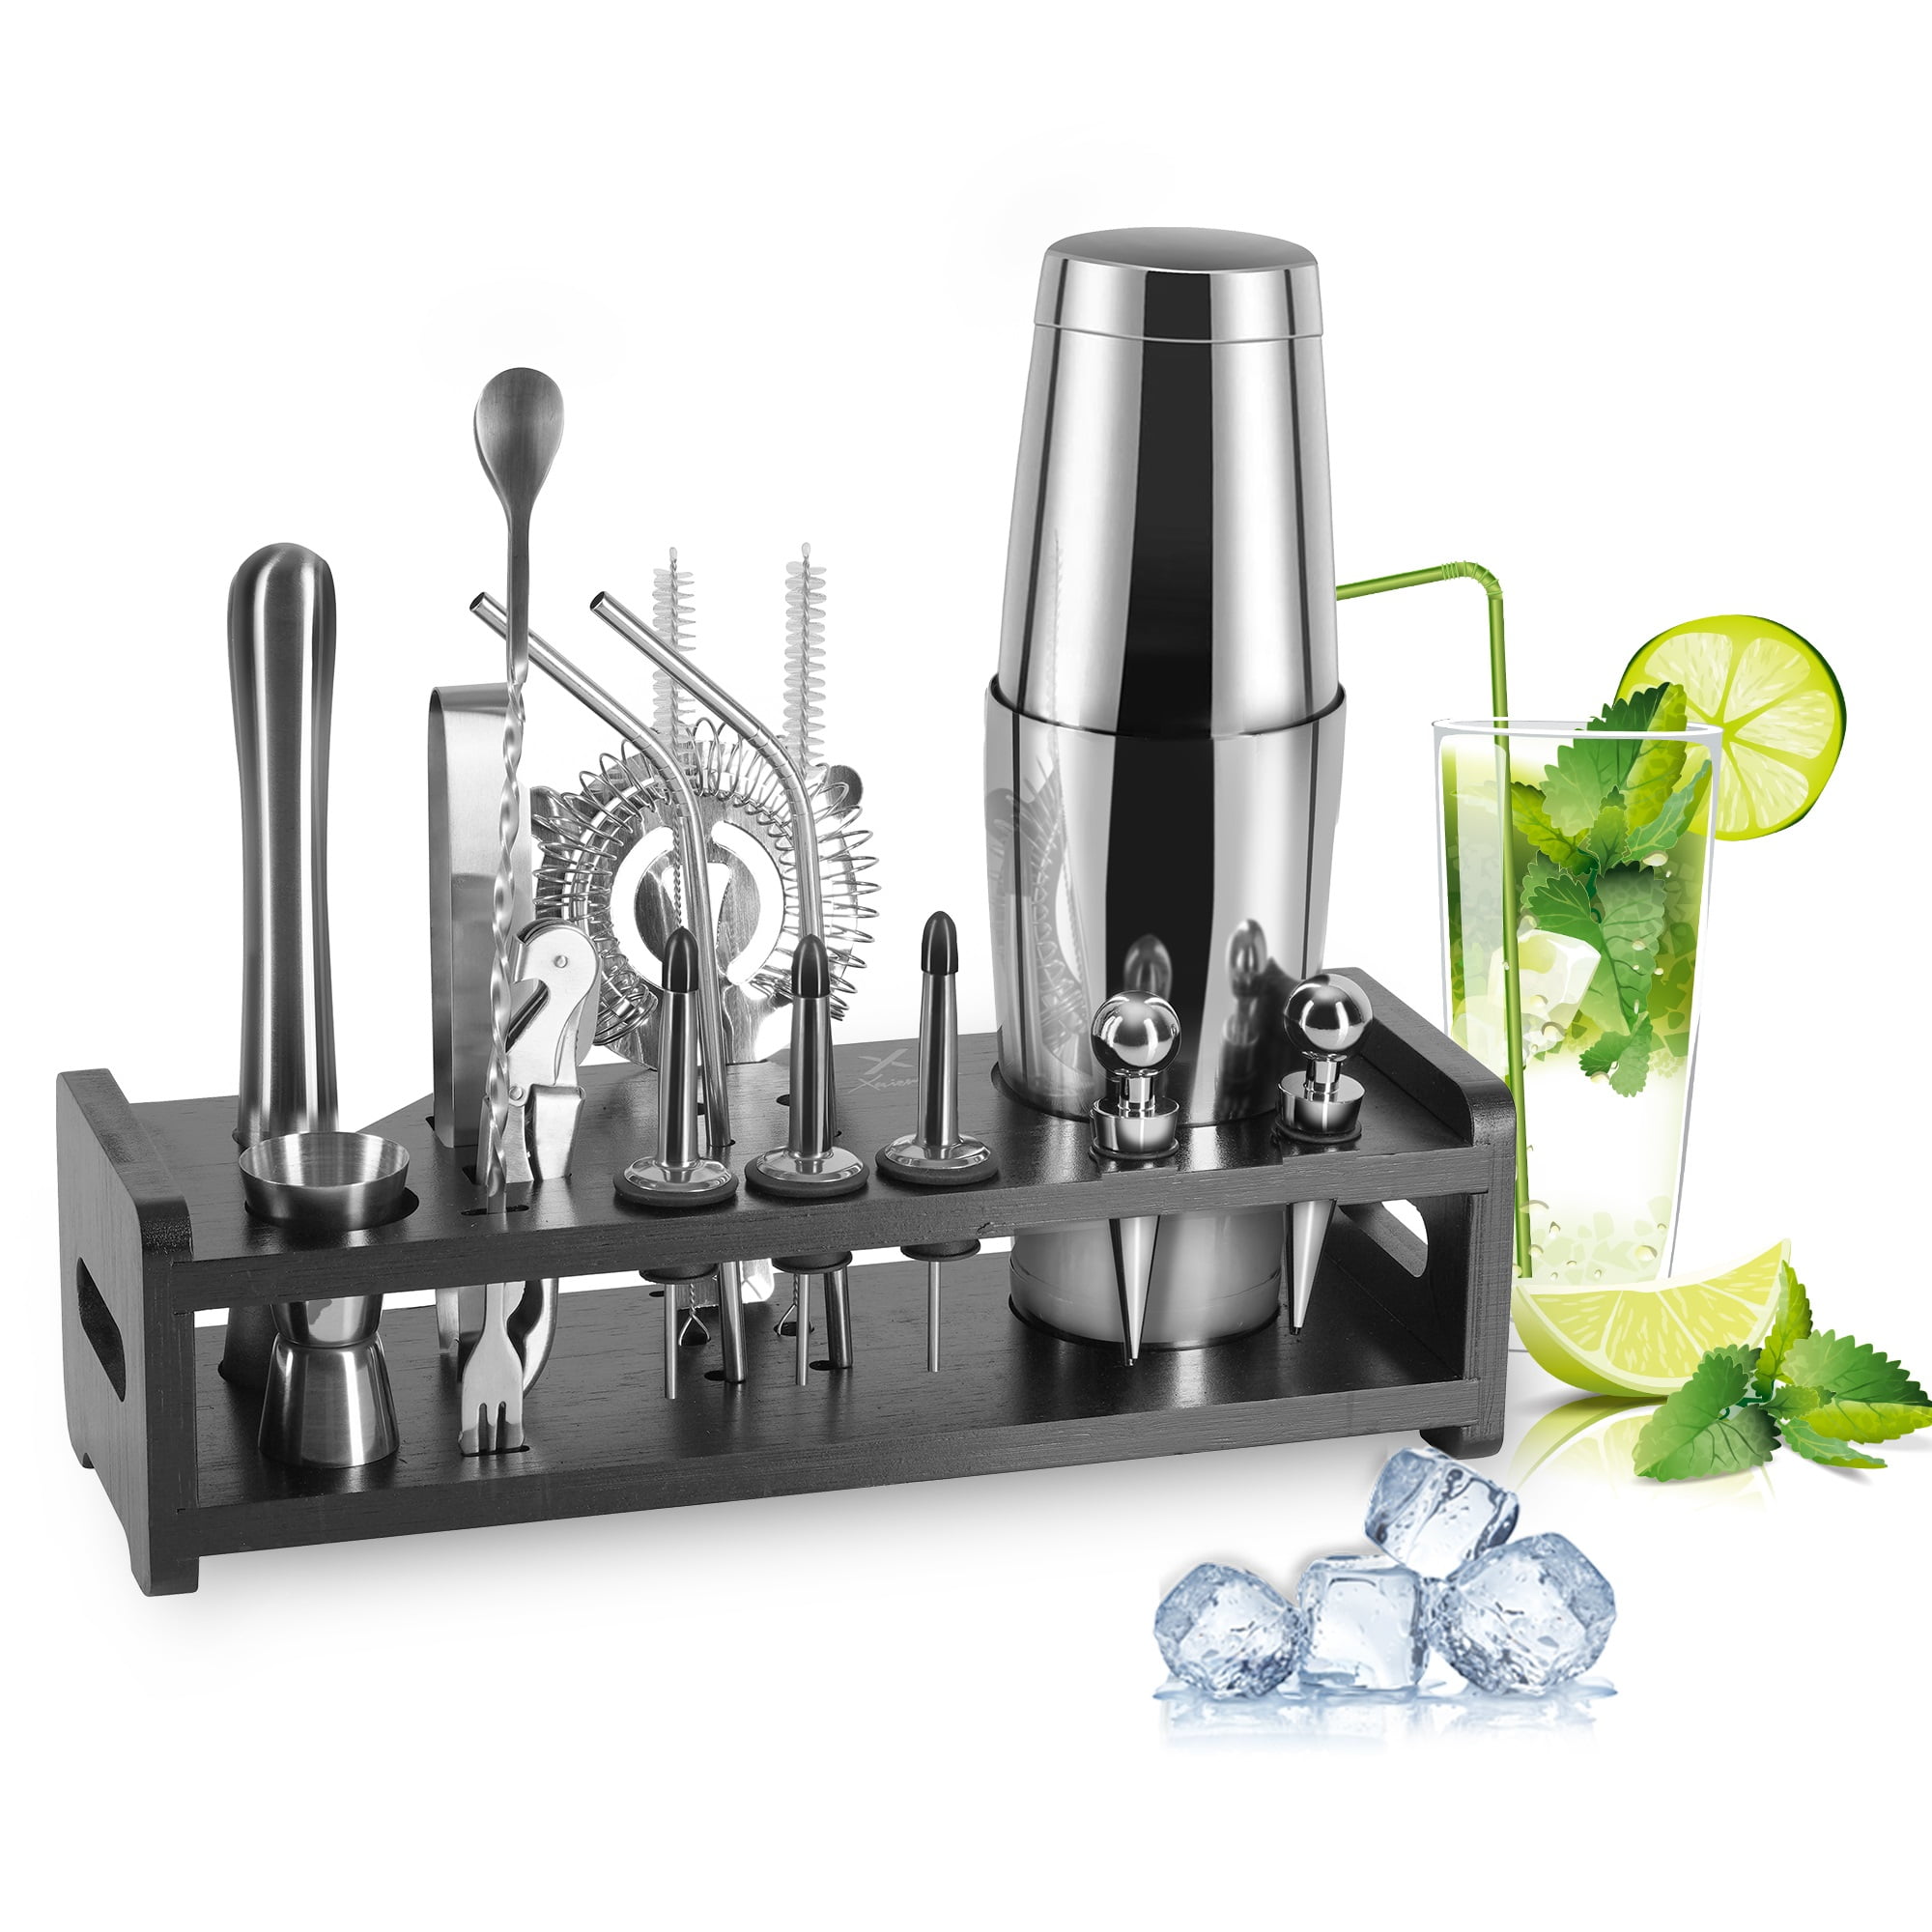 Viadha Kitchen Gadgets Cocktail Shaker Set with Stand,10-Piece Set,Gifts  for Men Grandpa,Stainless Steel Bartender Kit Bar Tools Set,Home, Bars